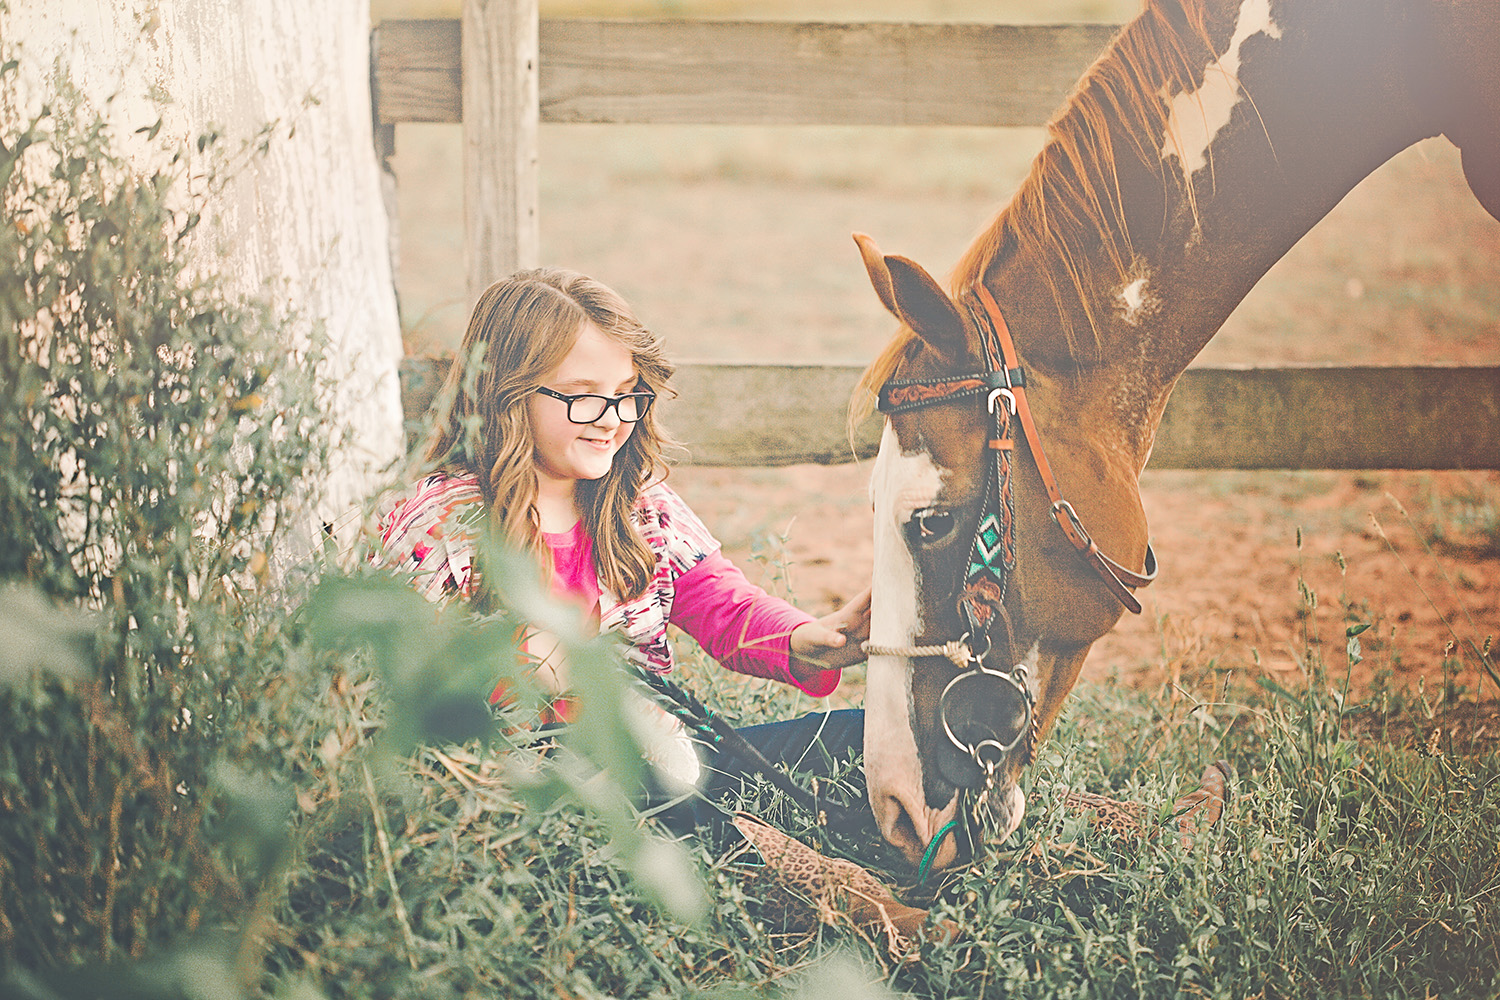 Portrait session of a girl and her horse by Natchitoches Portrait Photographer Wendy Robinette